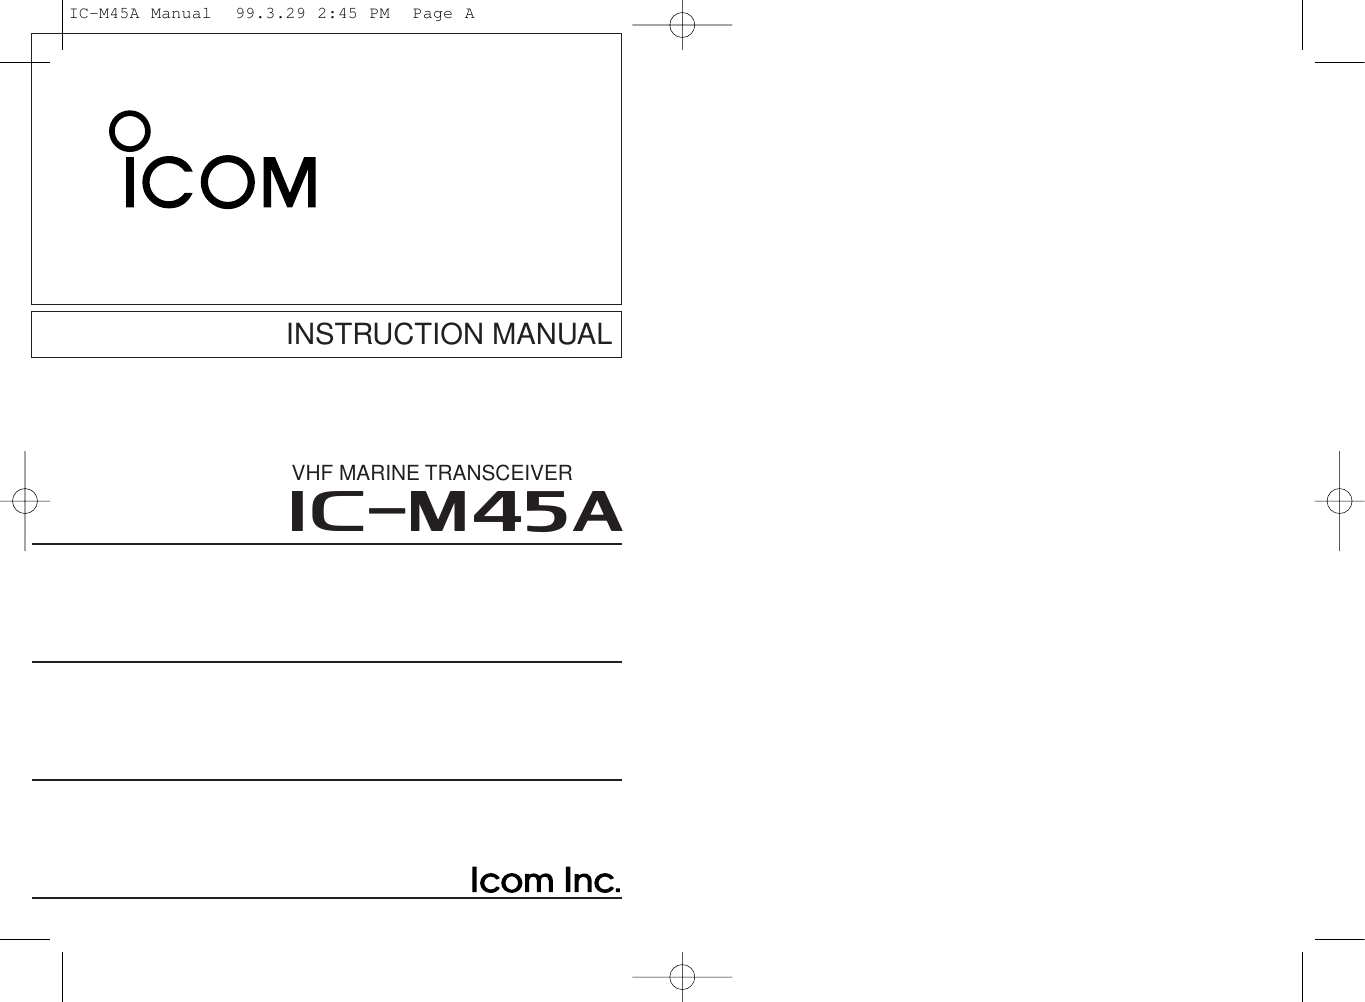 INSTRUCTION MANUALiM45AVHF MARINE TRANSCEIVERIC-M45A Manual  99.3.29 2:45 PM  Page A